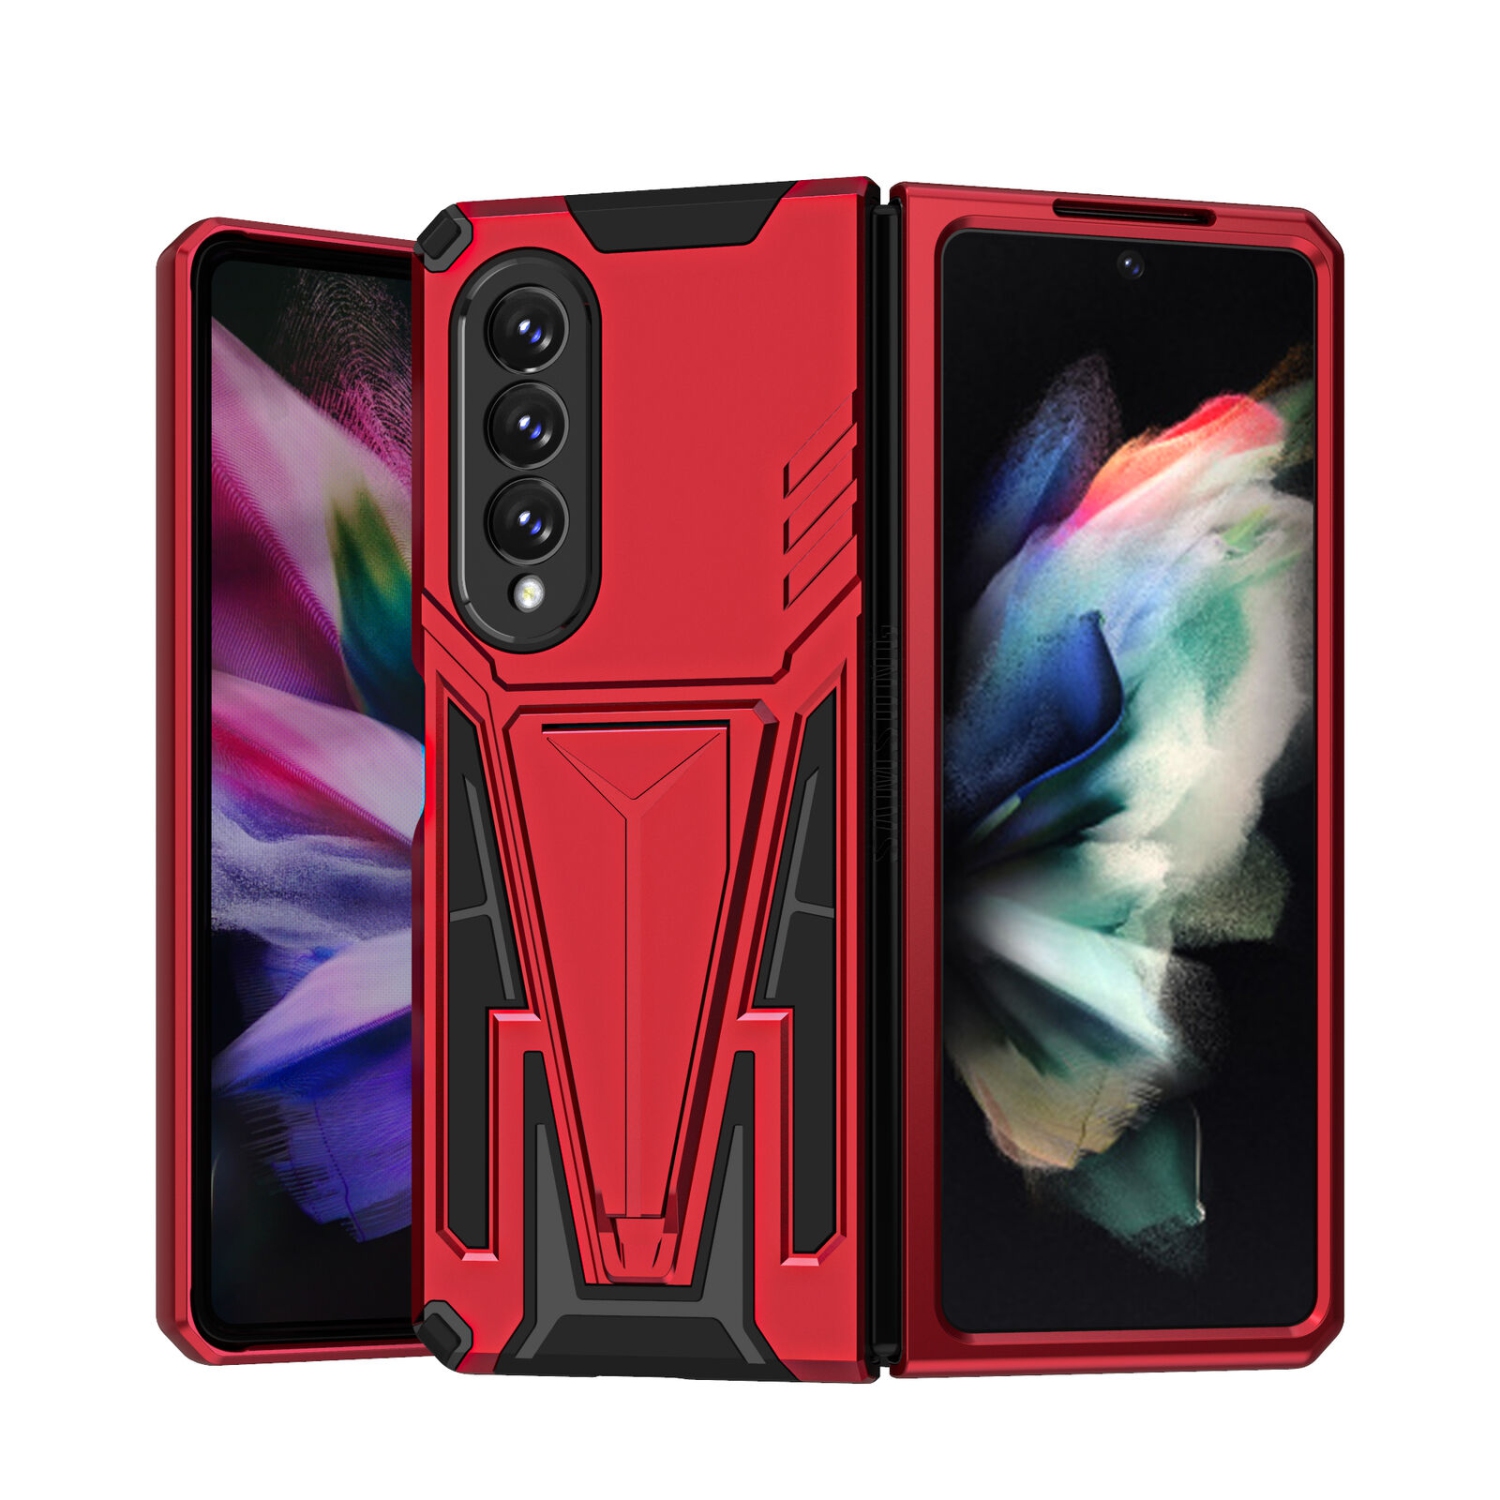 【CSmart】 Shockproof Heavy Duty Rugged Defender Case Kickstand Cover for Samsung Galaxy Z Fold 3 5G, Red